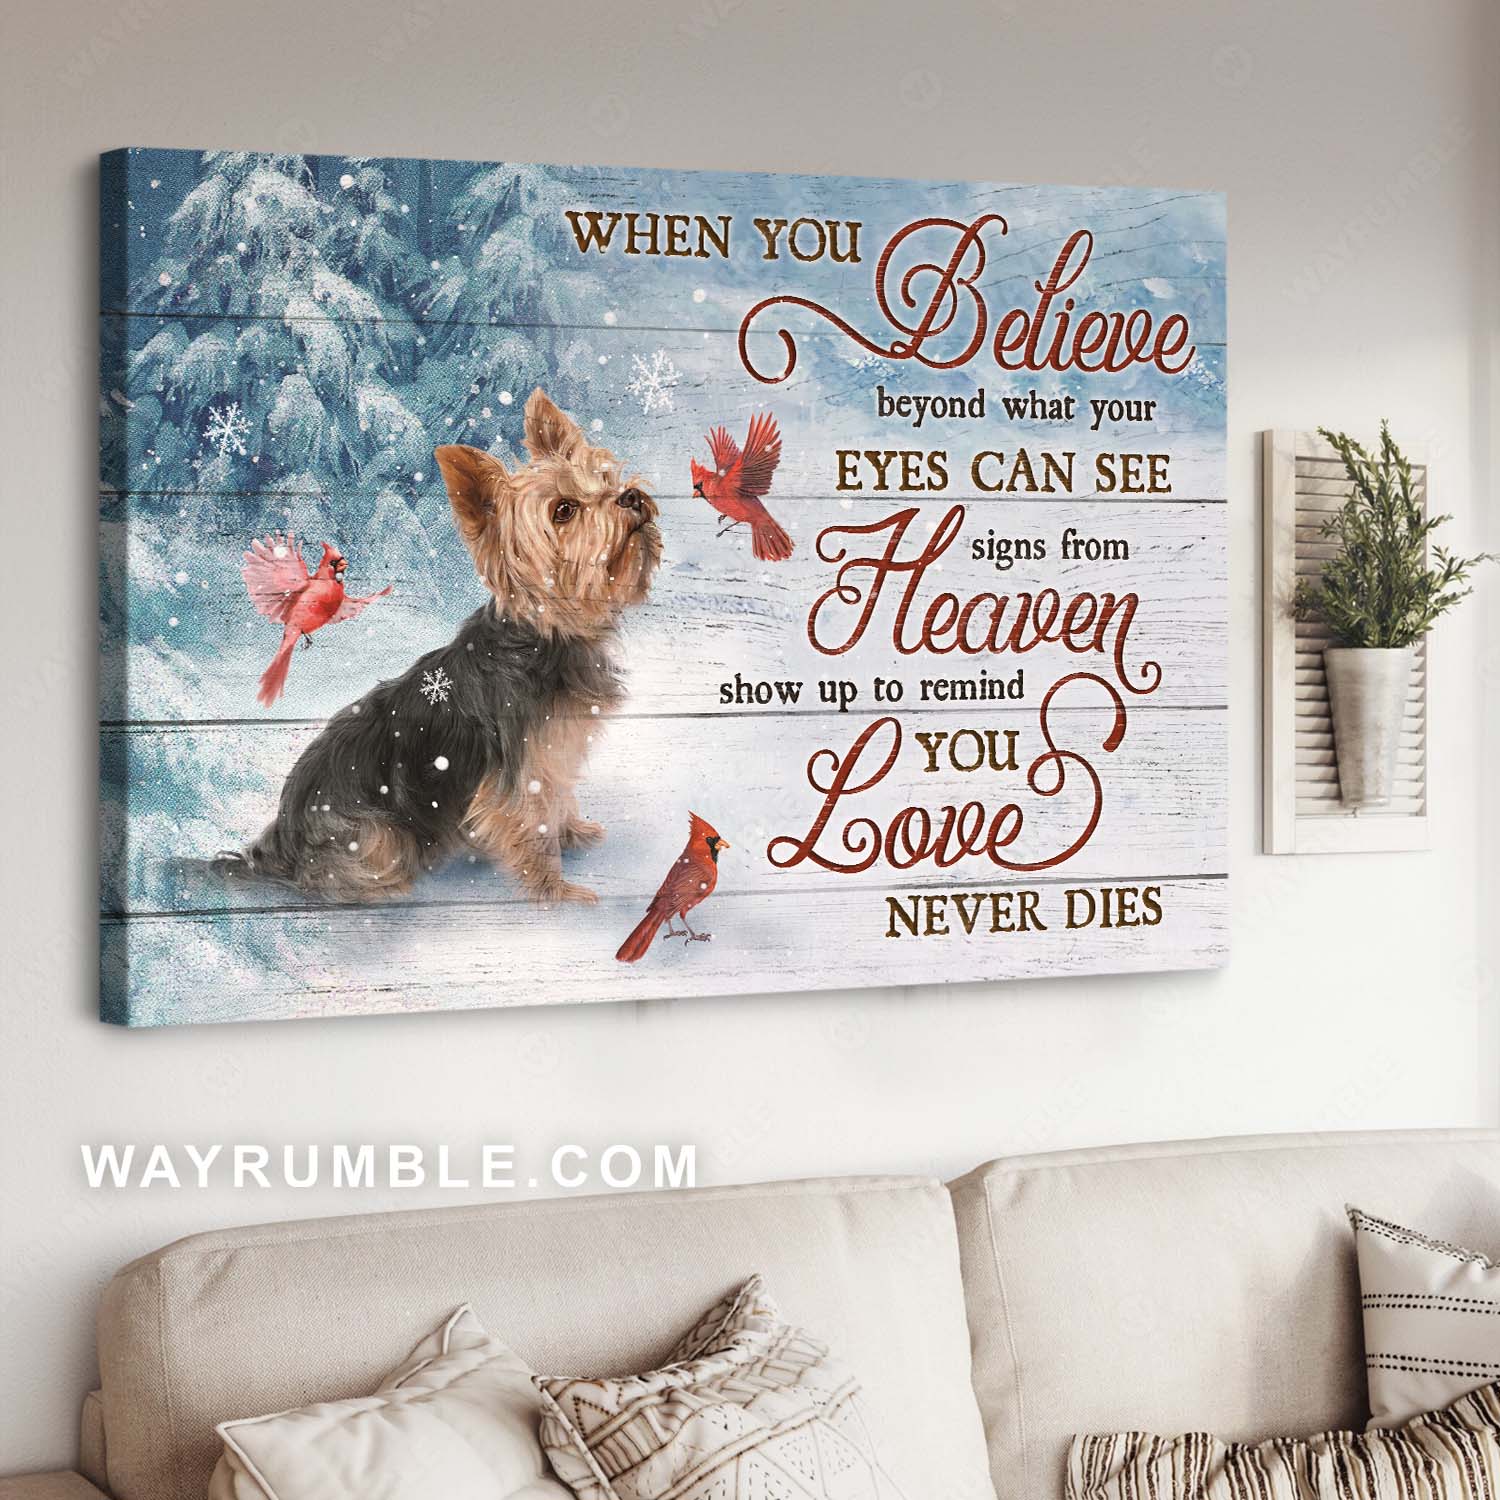 Adorable Yorkshire Terrier, Red cardinal, Snowy forest, Love never dies - Heaven Landscape Canvas Prints, Home Decor Wall Art